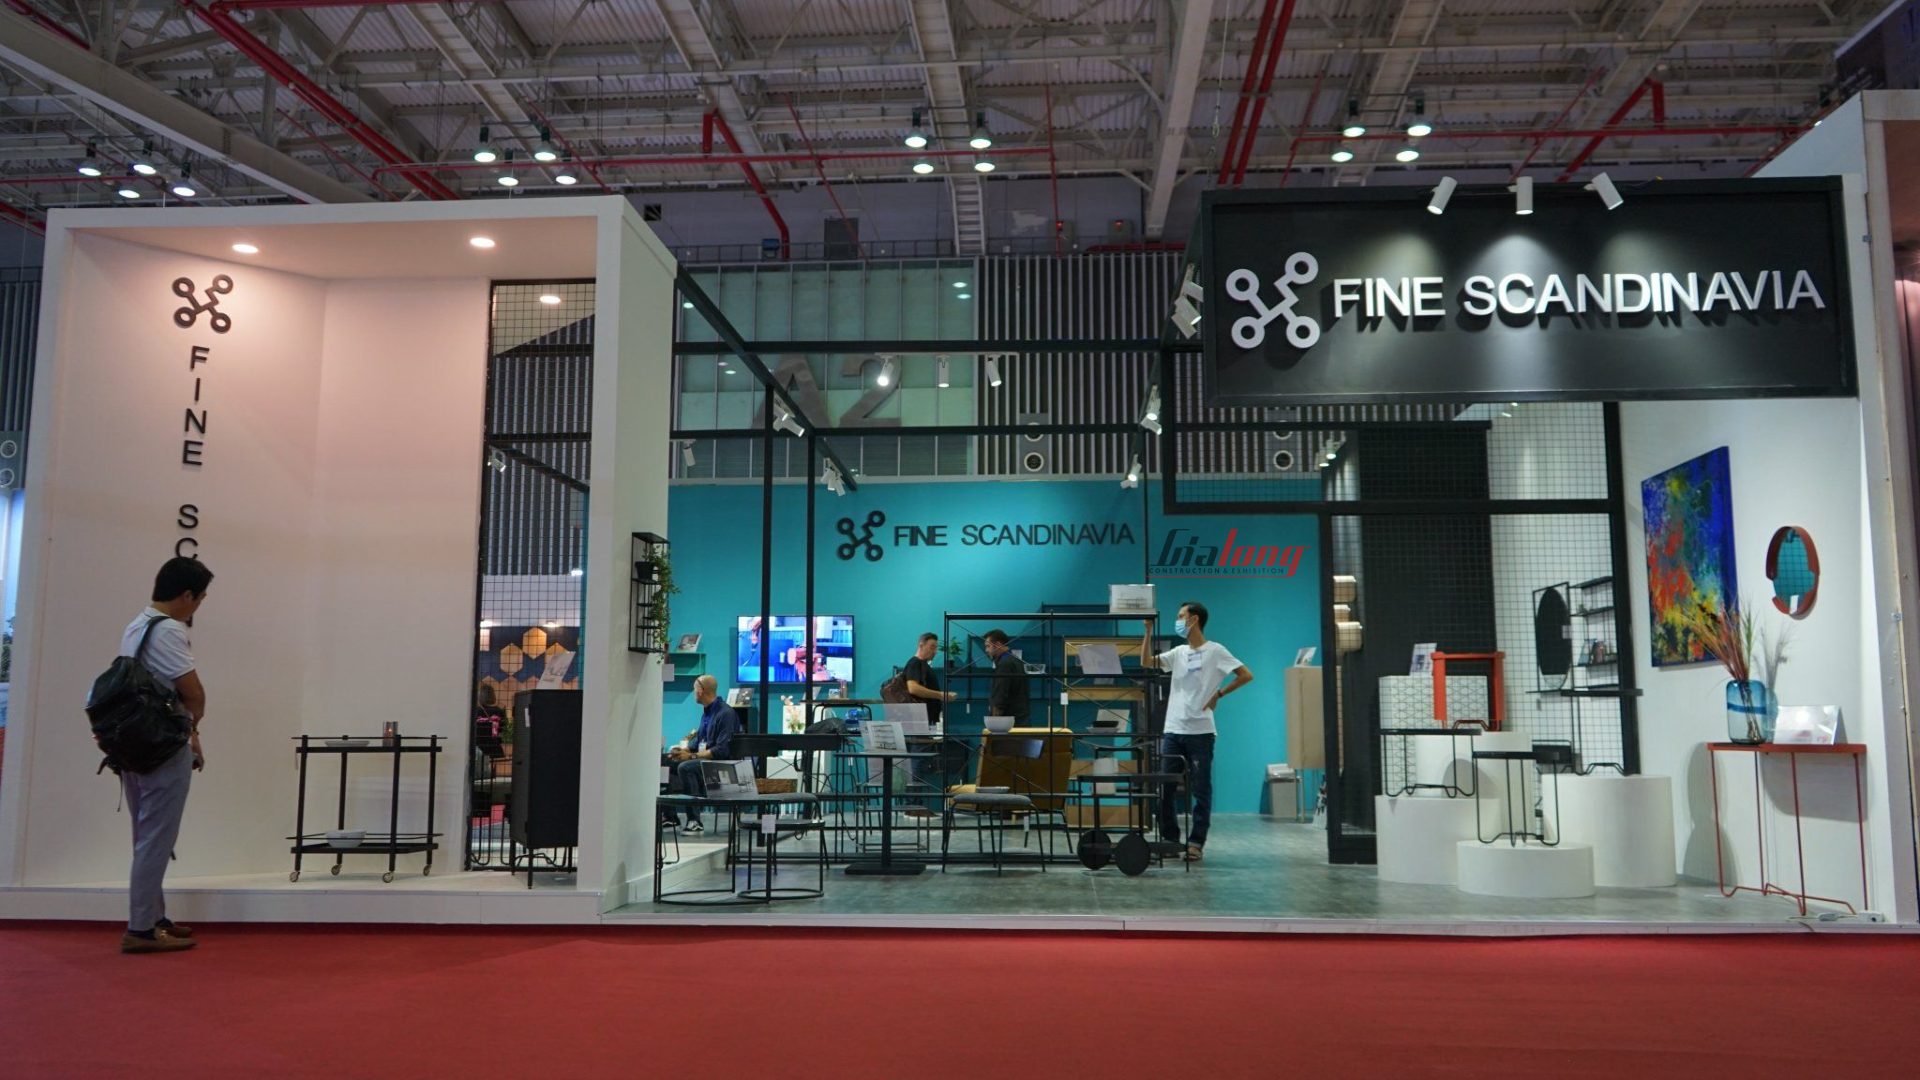 FINE SCANDINAVIA - Booth designed and constructed by Gia Long